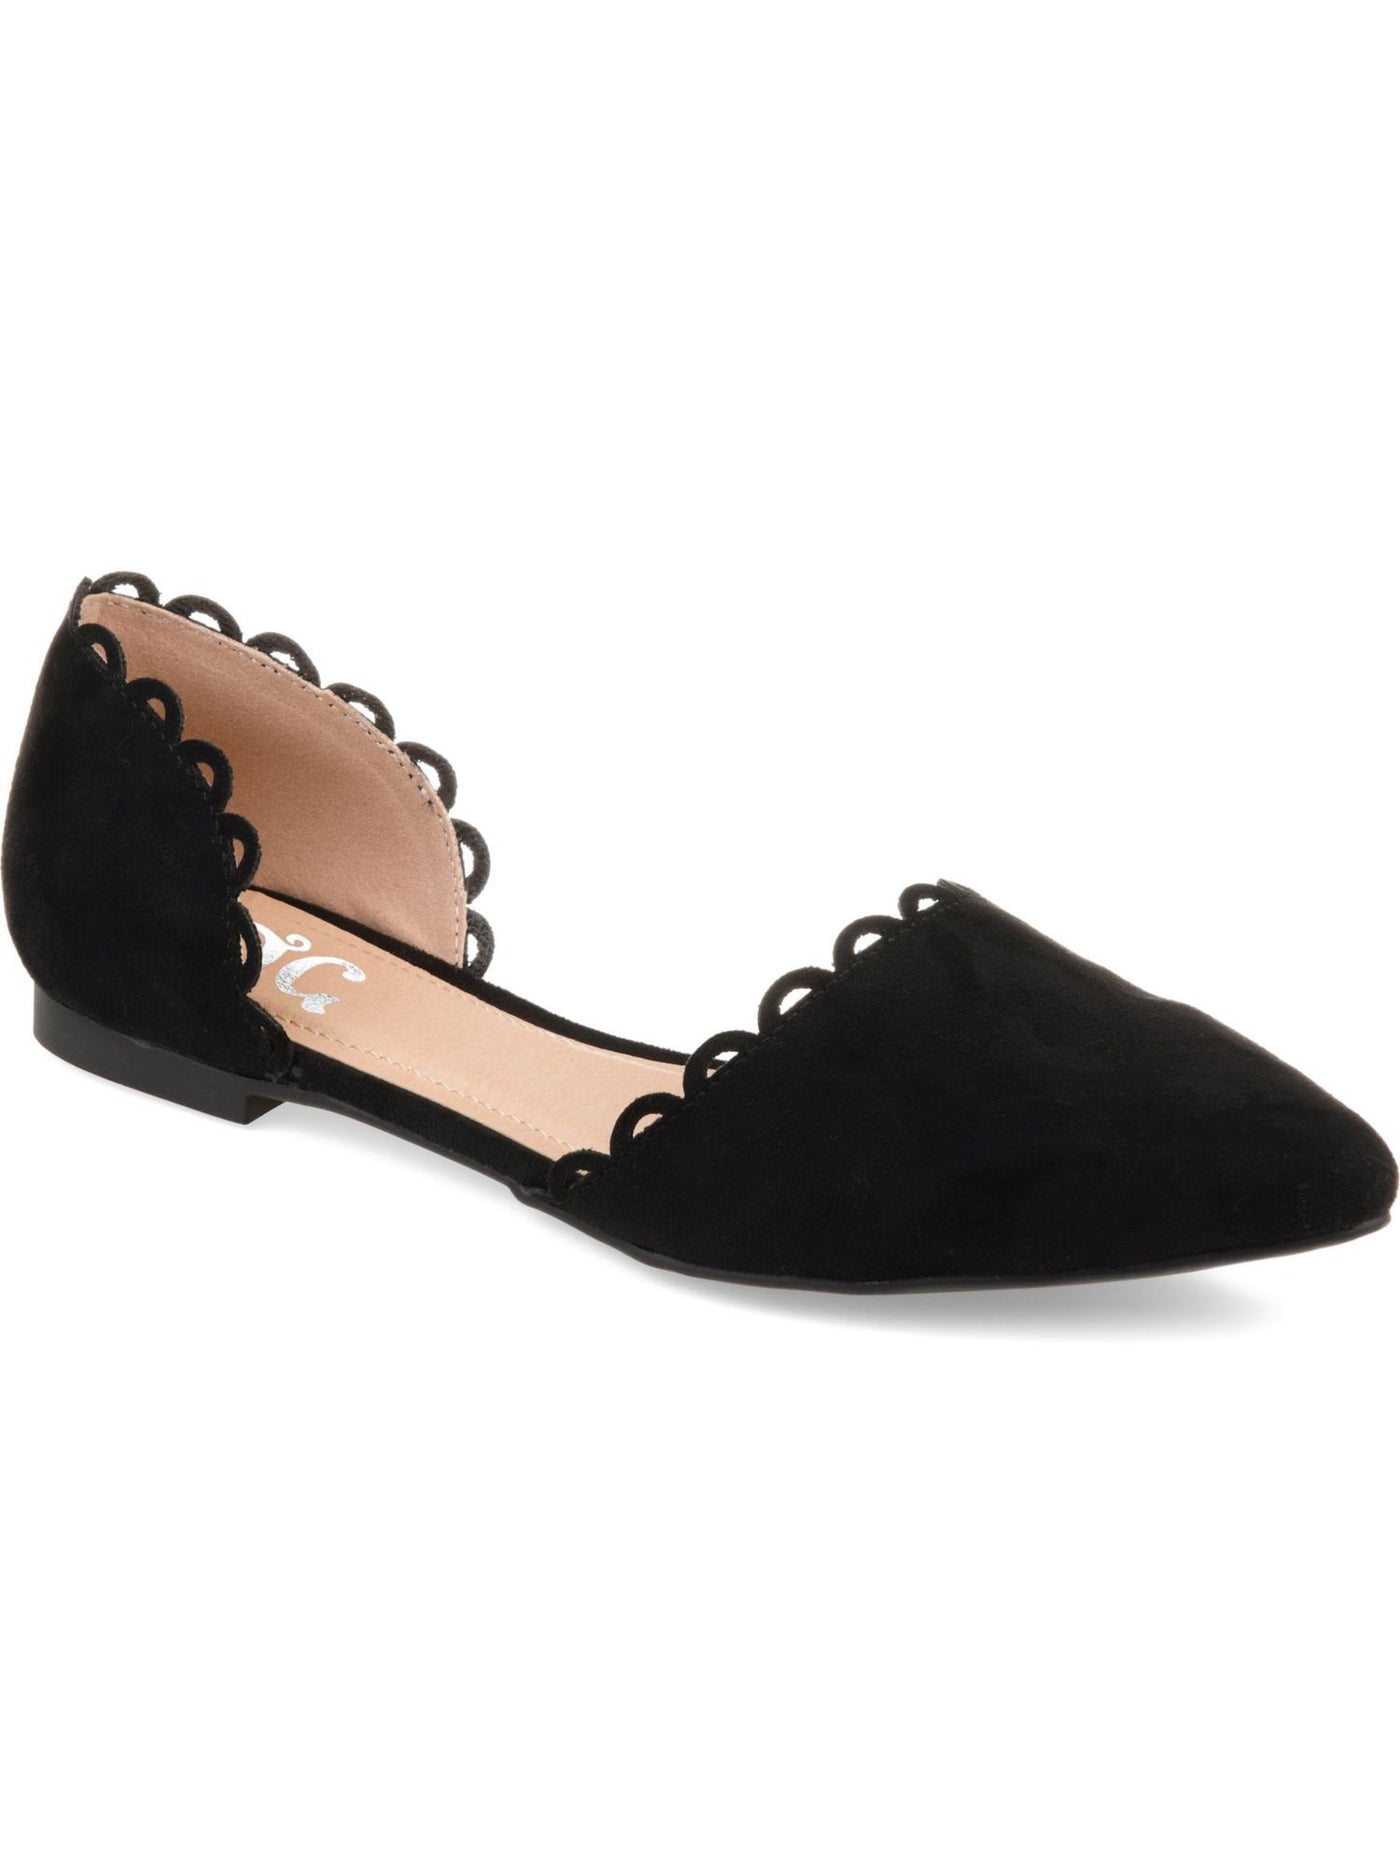 JOURNEE COLLECTION Womens Black Padded Scalloped Cut Out Jezlin Almond Toe Slip On Flats Shoes 8